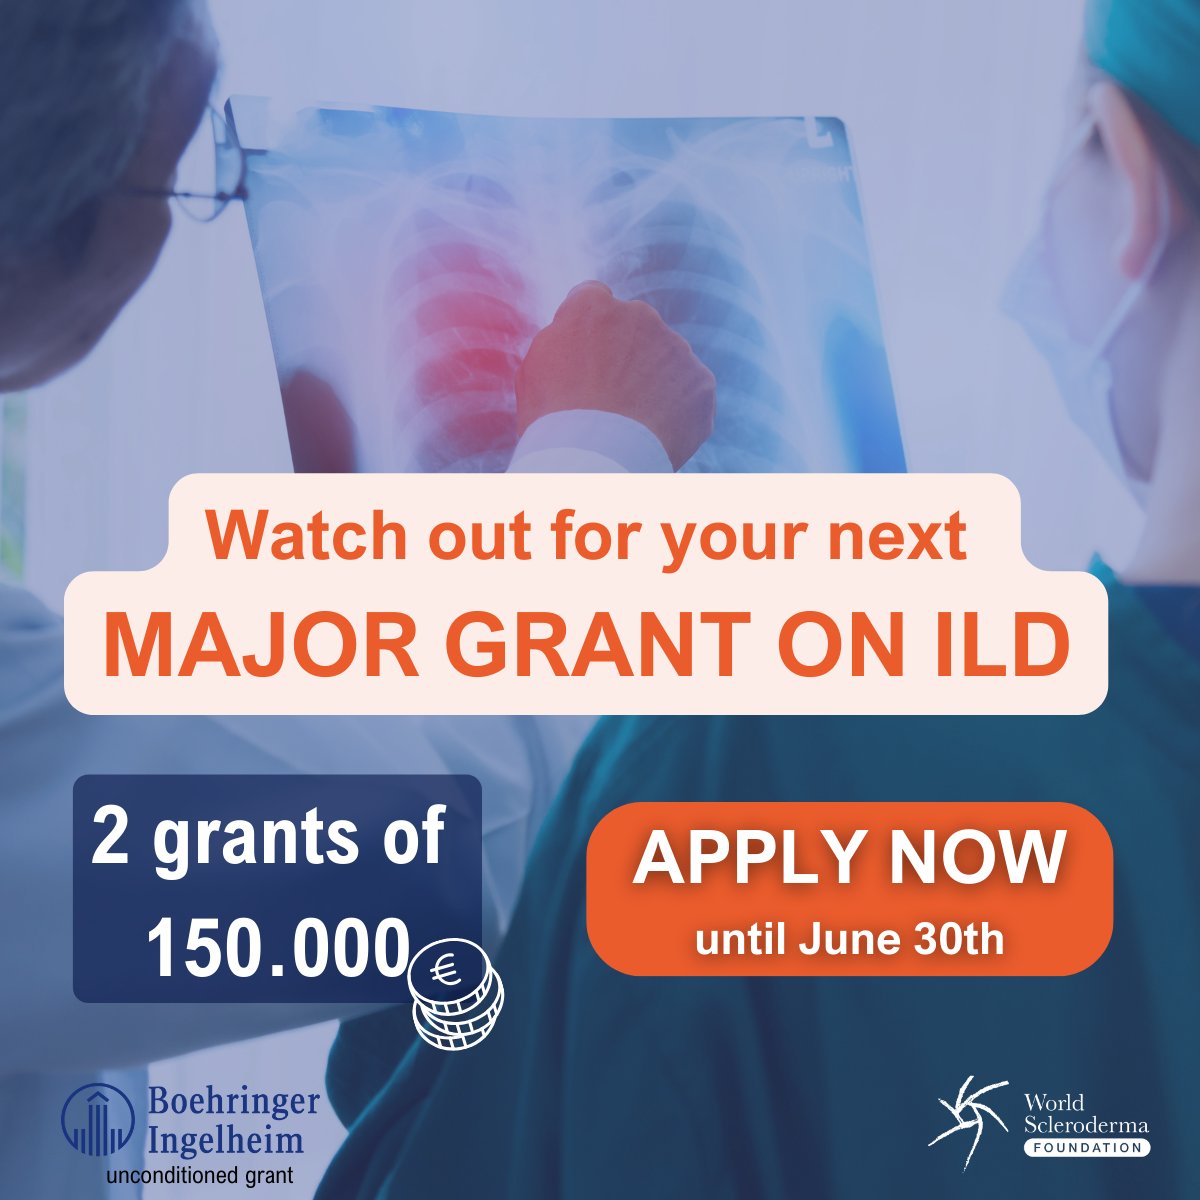 We would like to announce the opening of applications for the Major Grant on ILD 2024! 🔍Focus: Innovative projects on pulmonary fibrosis. 💰 Funding: 300,000 euros available in 2 grants. 🗓 LOI deadline: June 30th, 2024. Submit your application now! forms.office.com/e/5rMk0Vtvxt